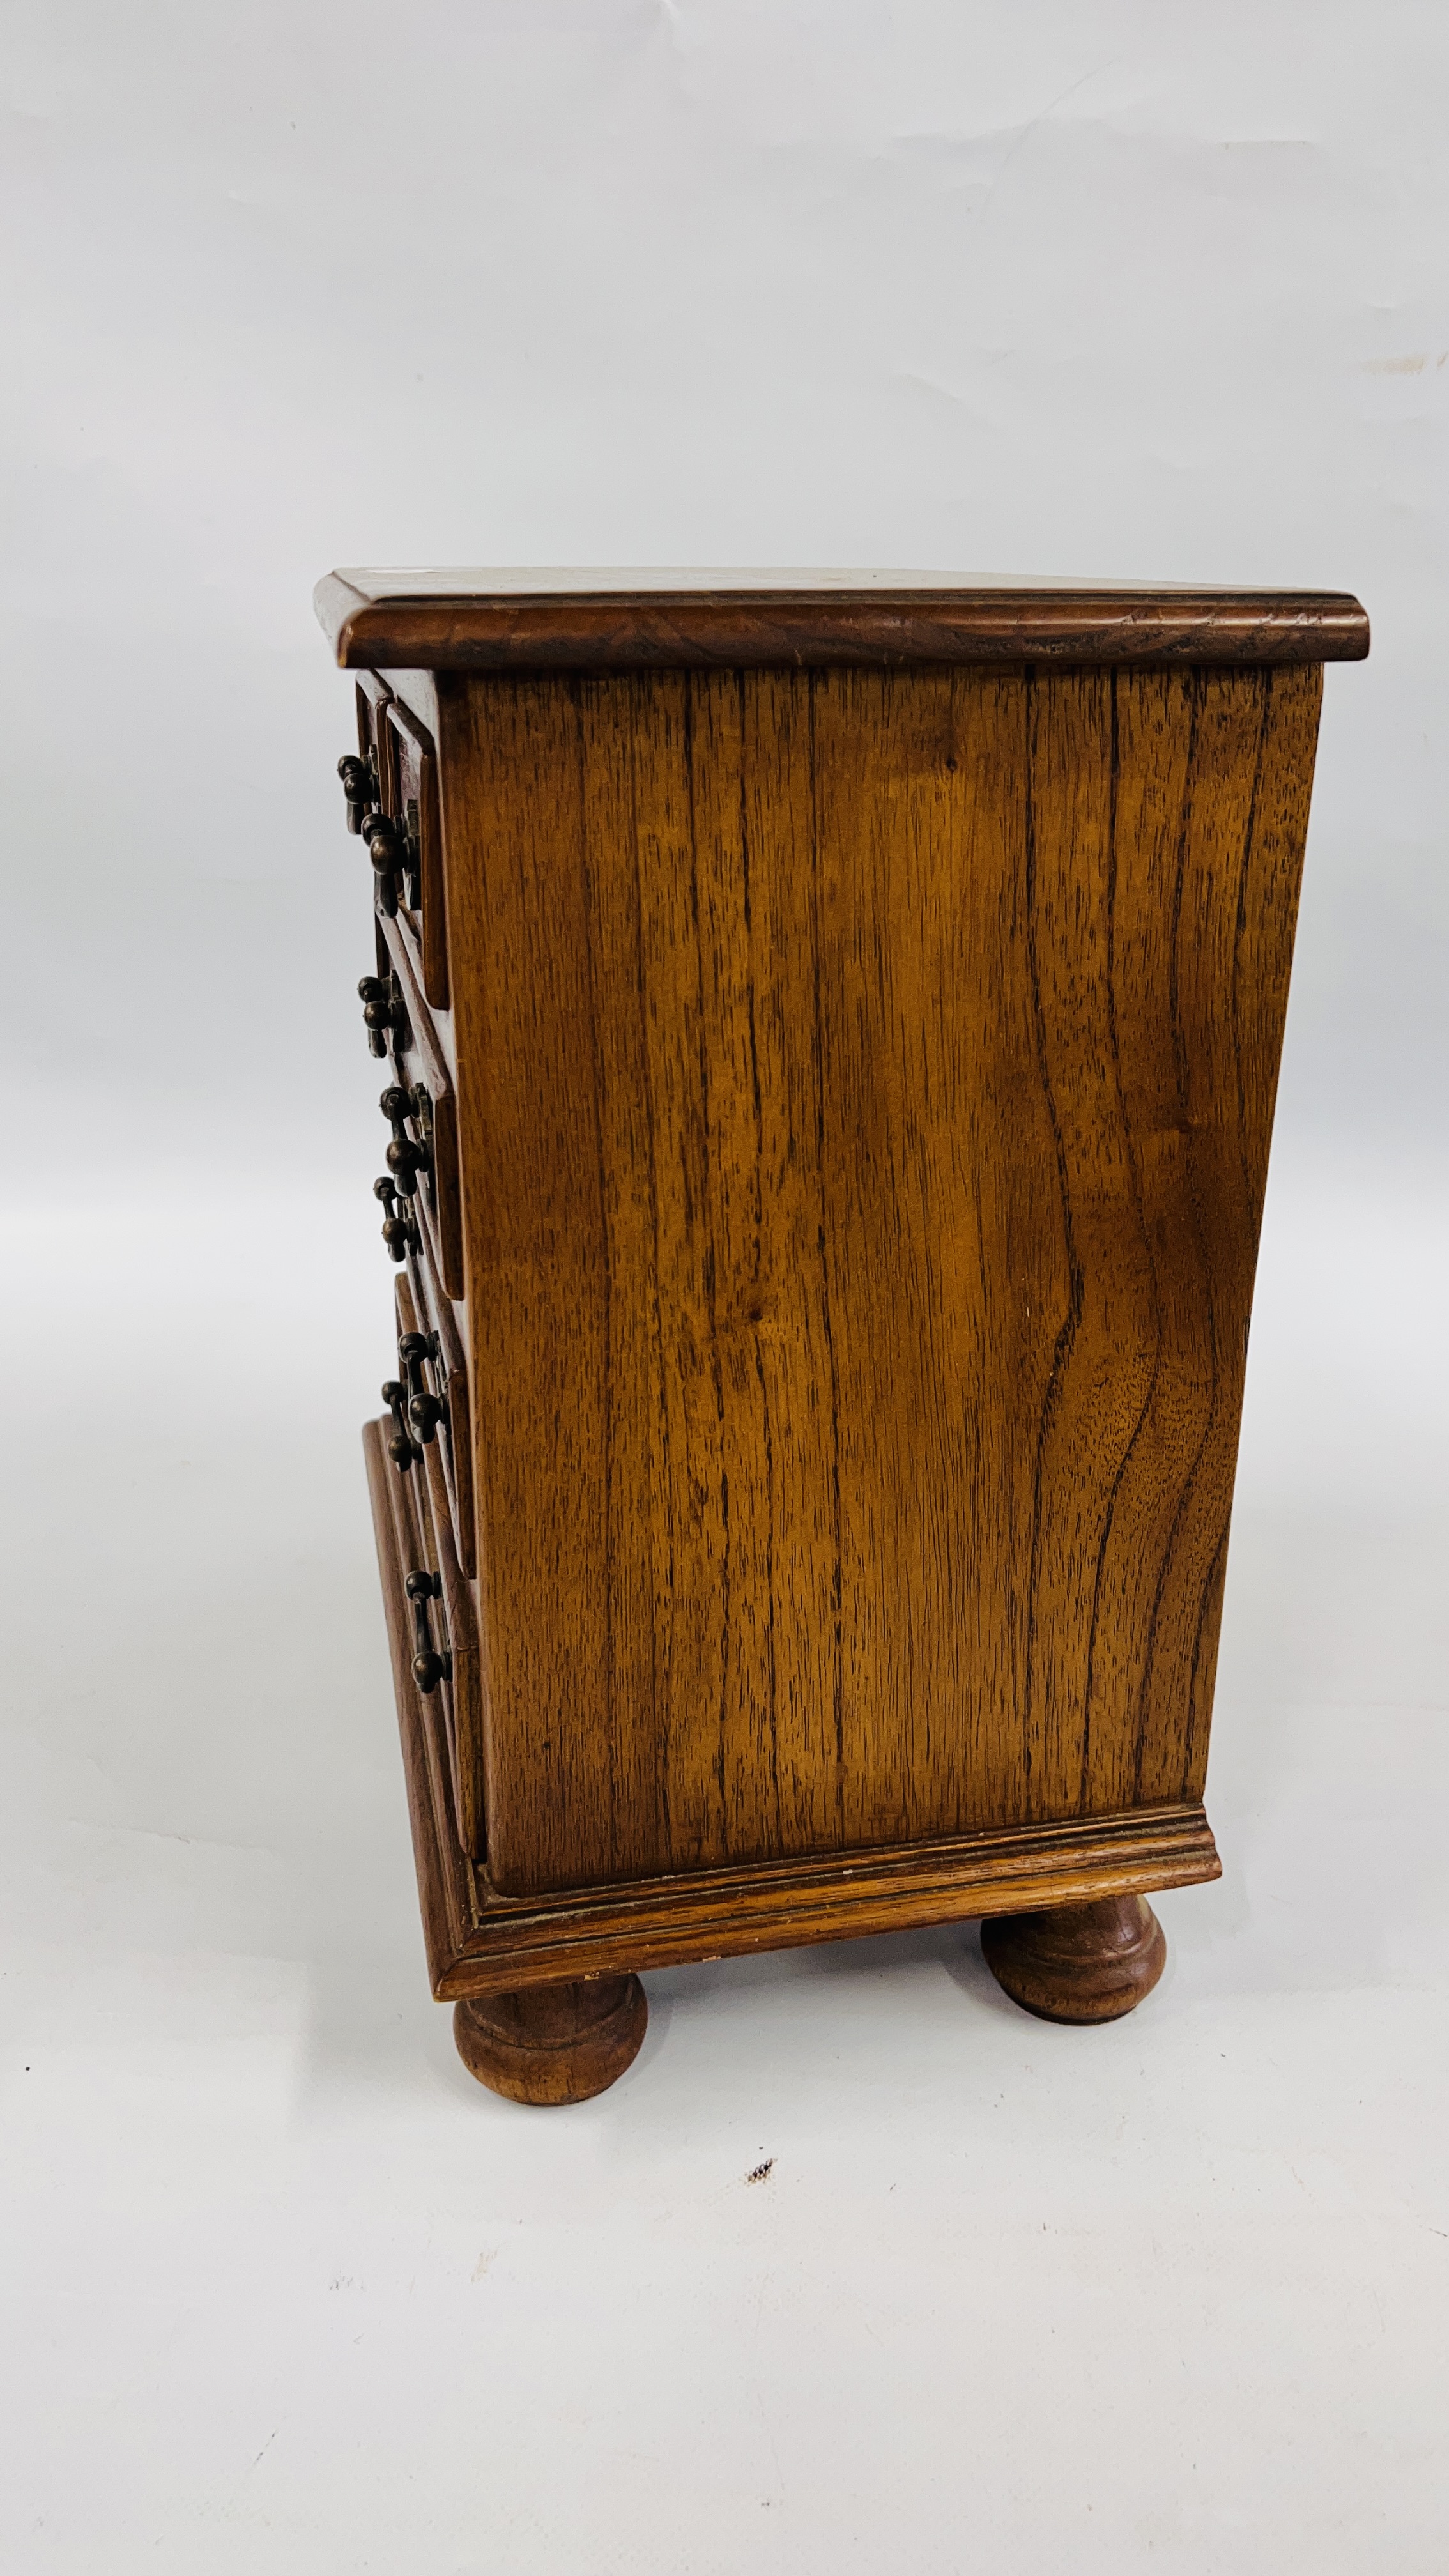 A MINIATURE 2 OVER 3 OAK CHEST OF DRAWERS, W 36CM X D 23CM X H 40CM. - Image 5 of 6